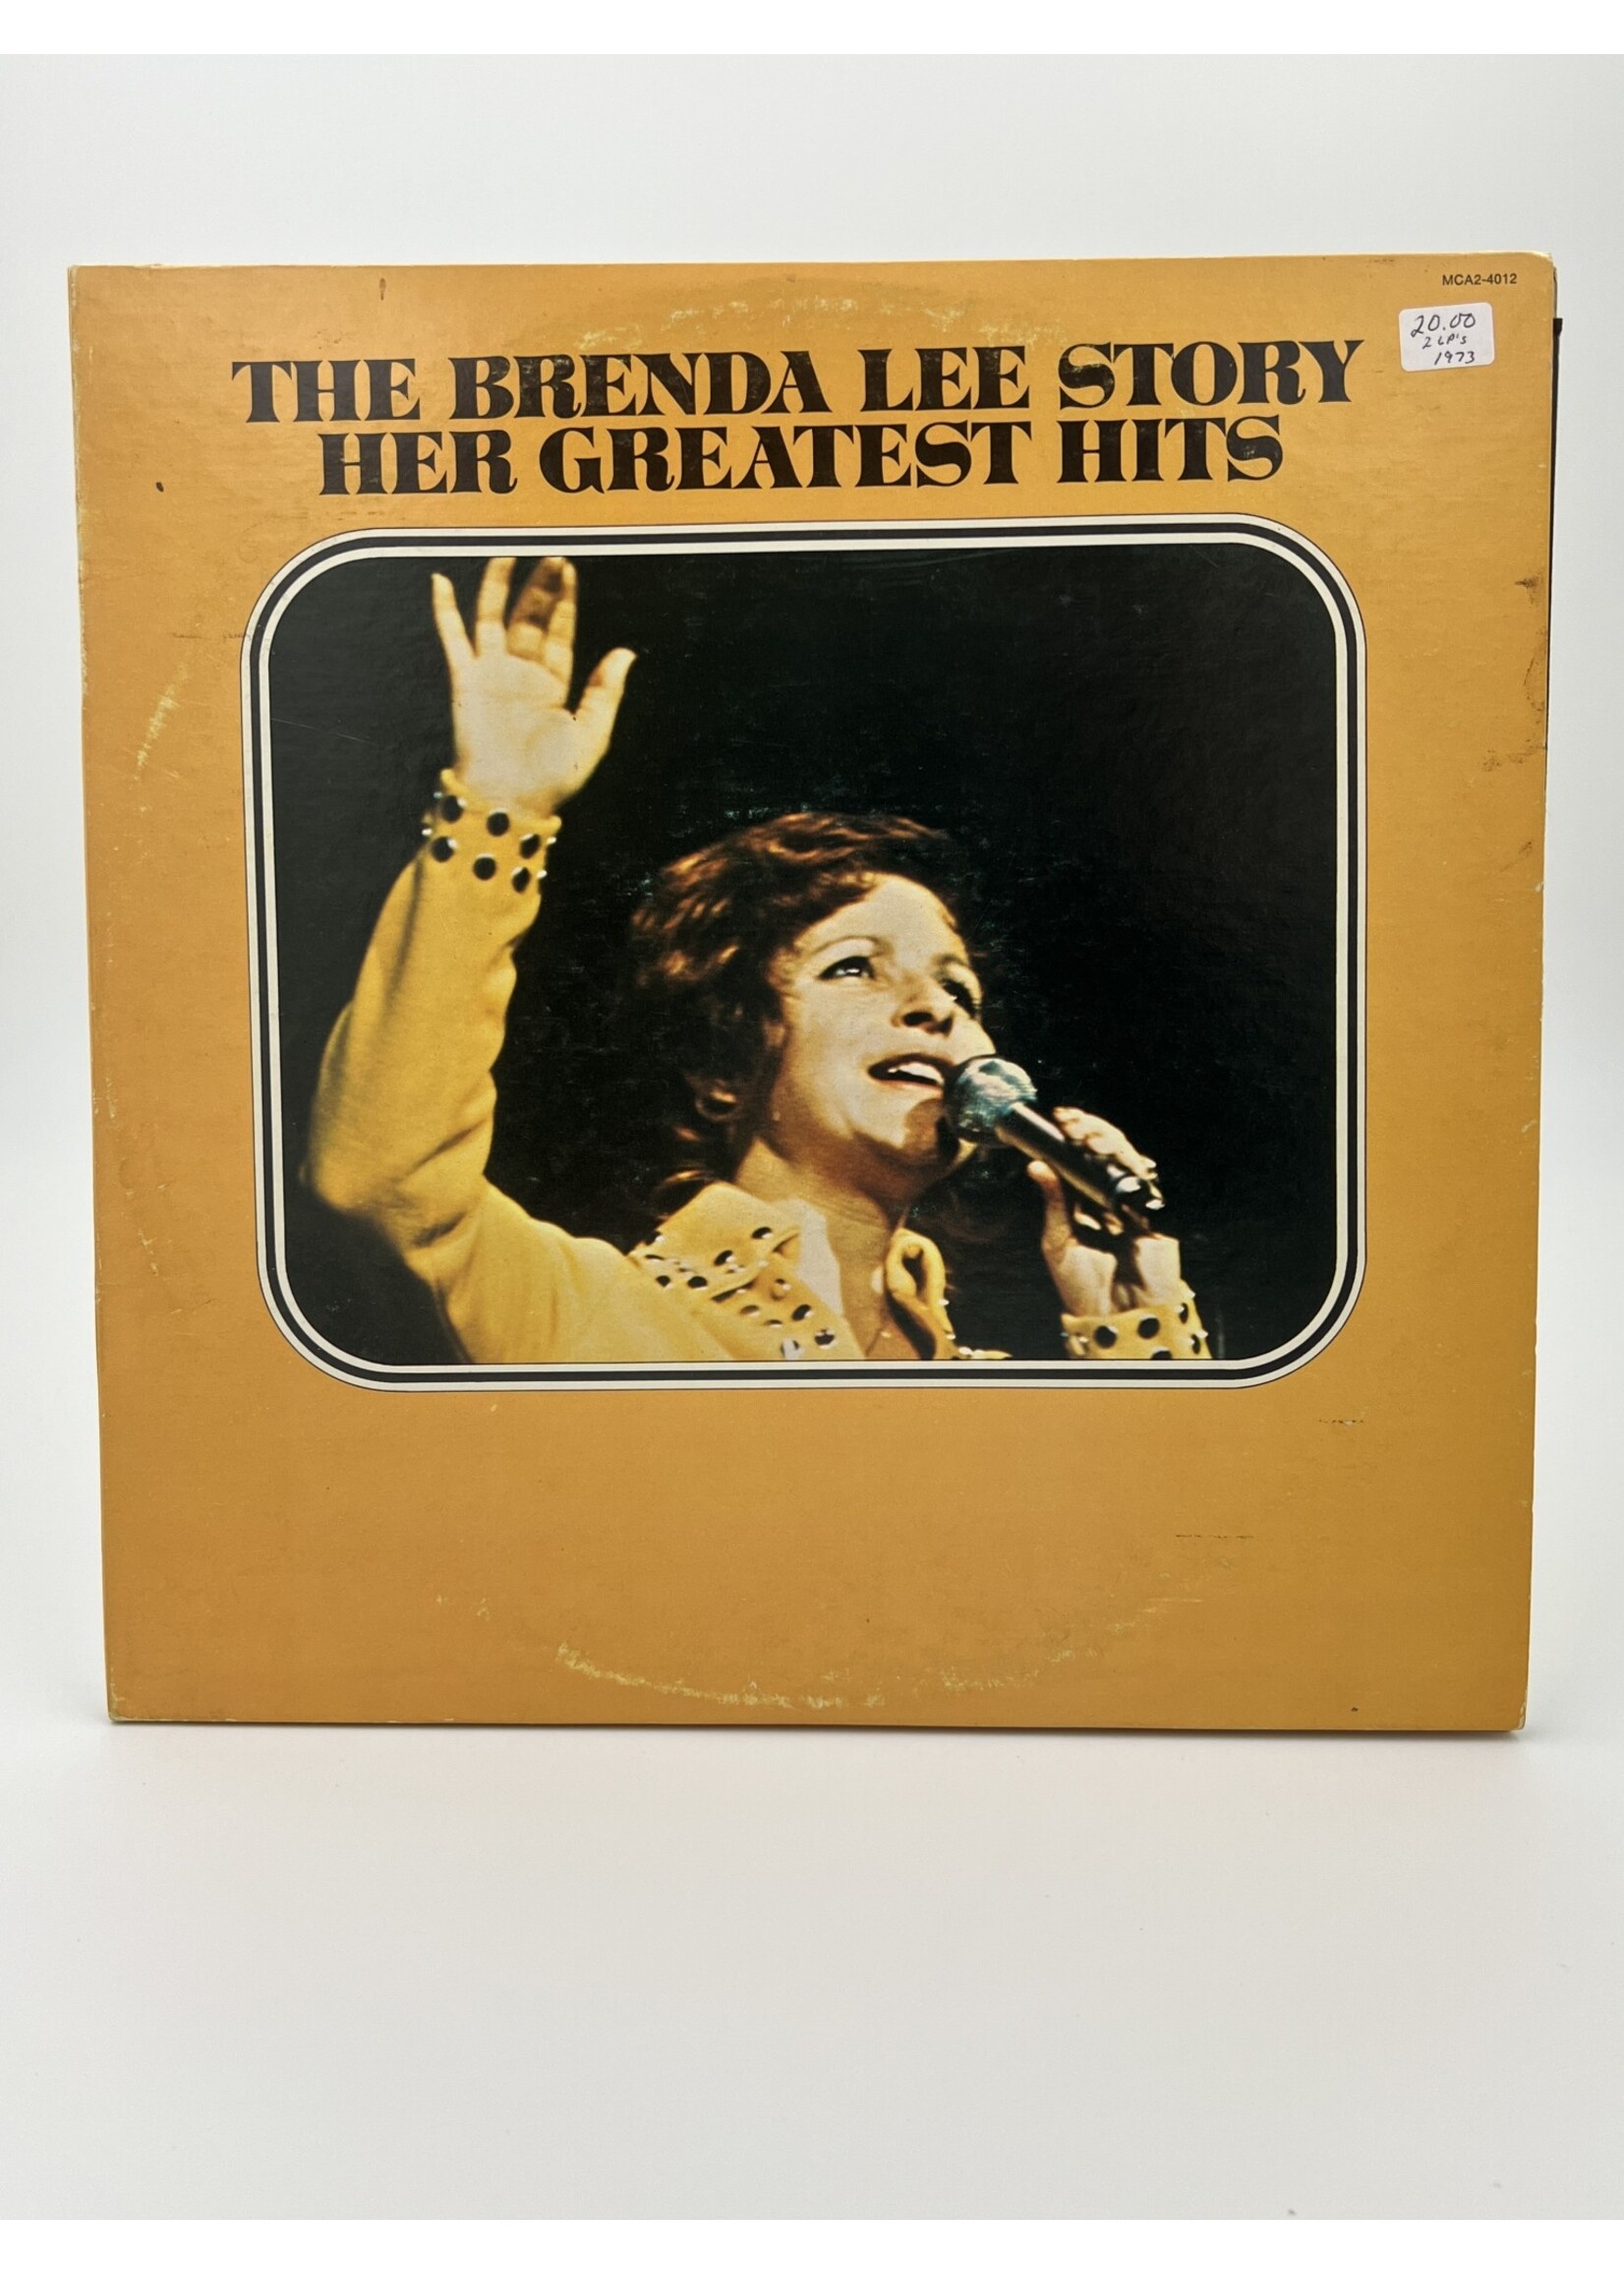 LP   The Brenda Lee Story Her Greatest Hits 2 LP Record